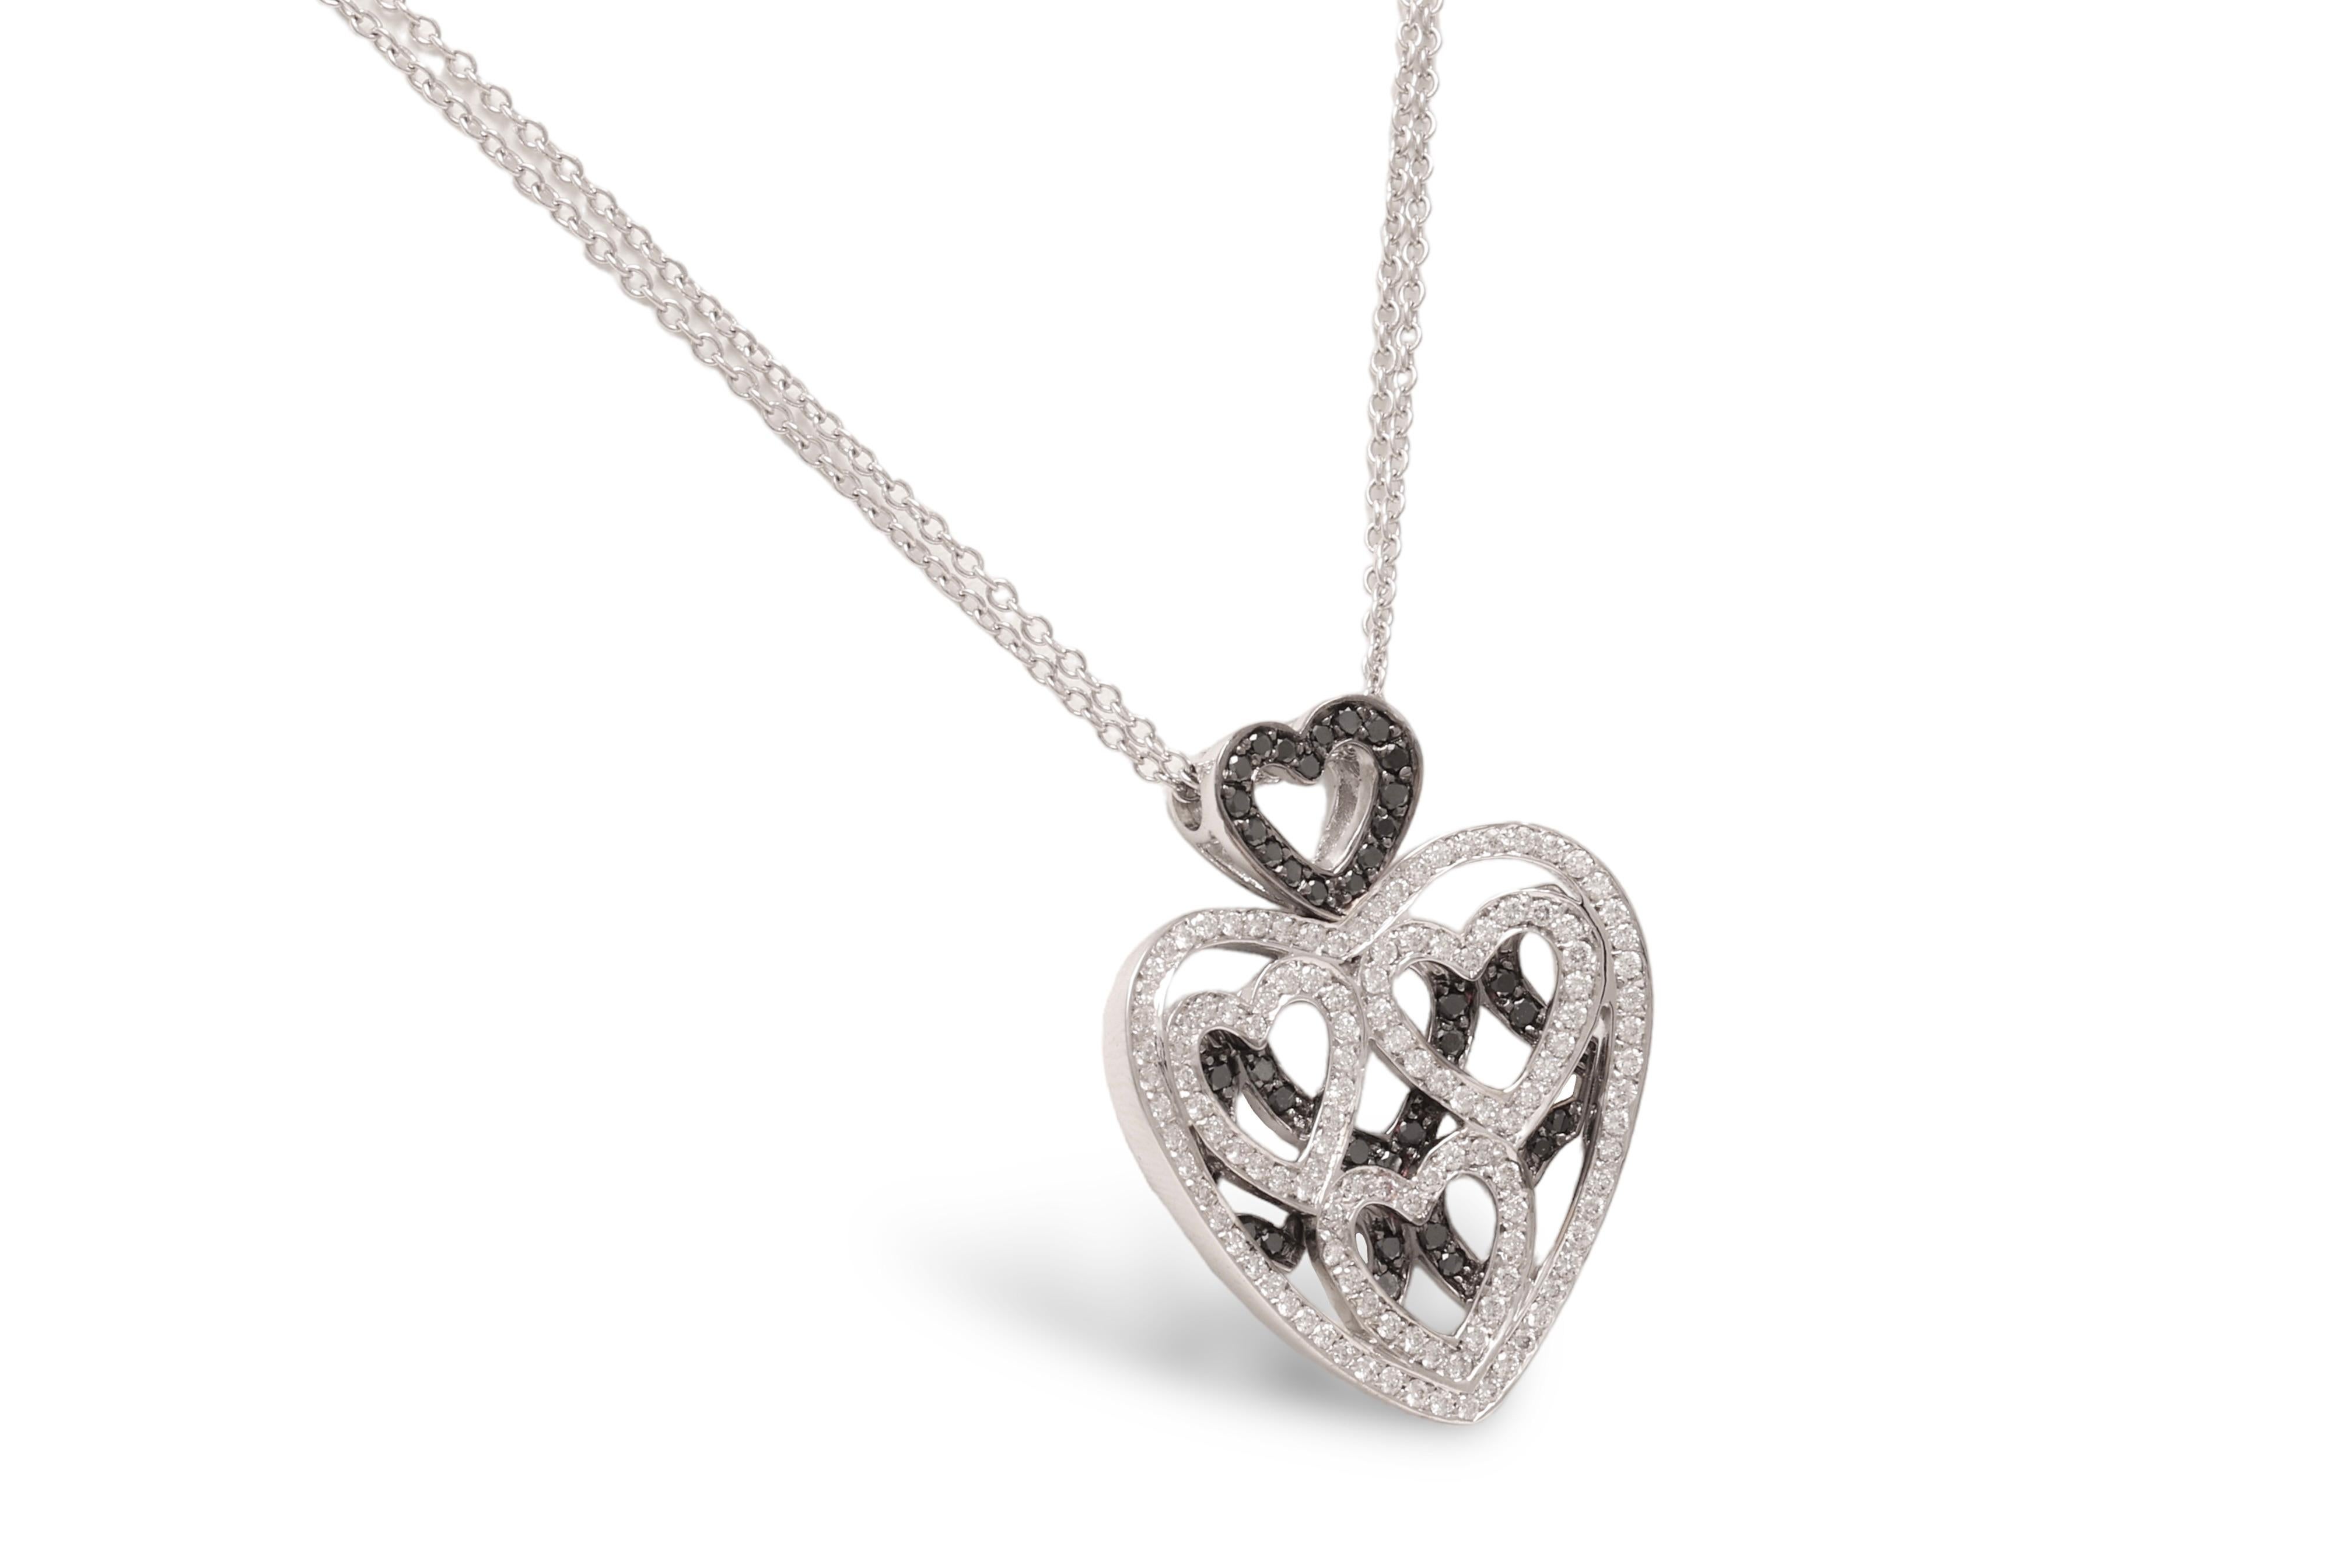  18 kt. White Gold Heart Necklace With 1 ct. White & Black Diamonds  In New Condition For Sale In Antwerp, BE